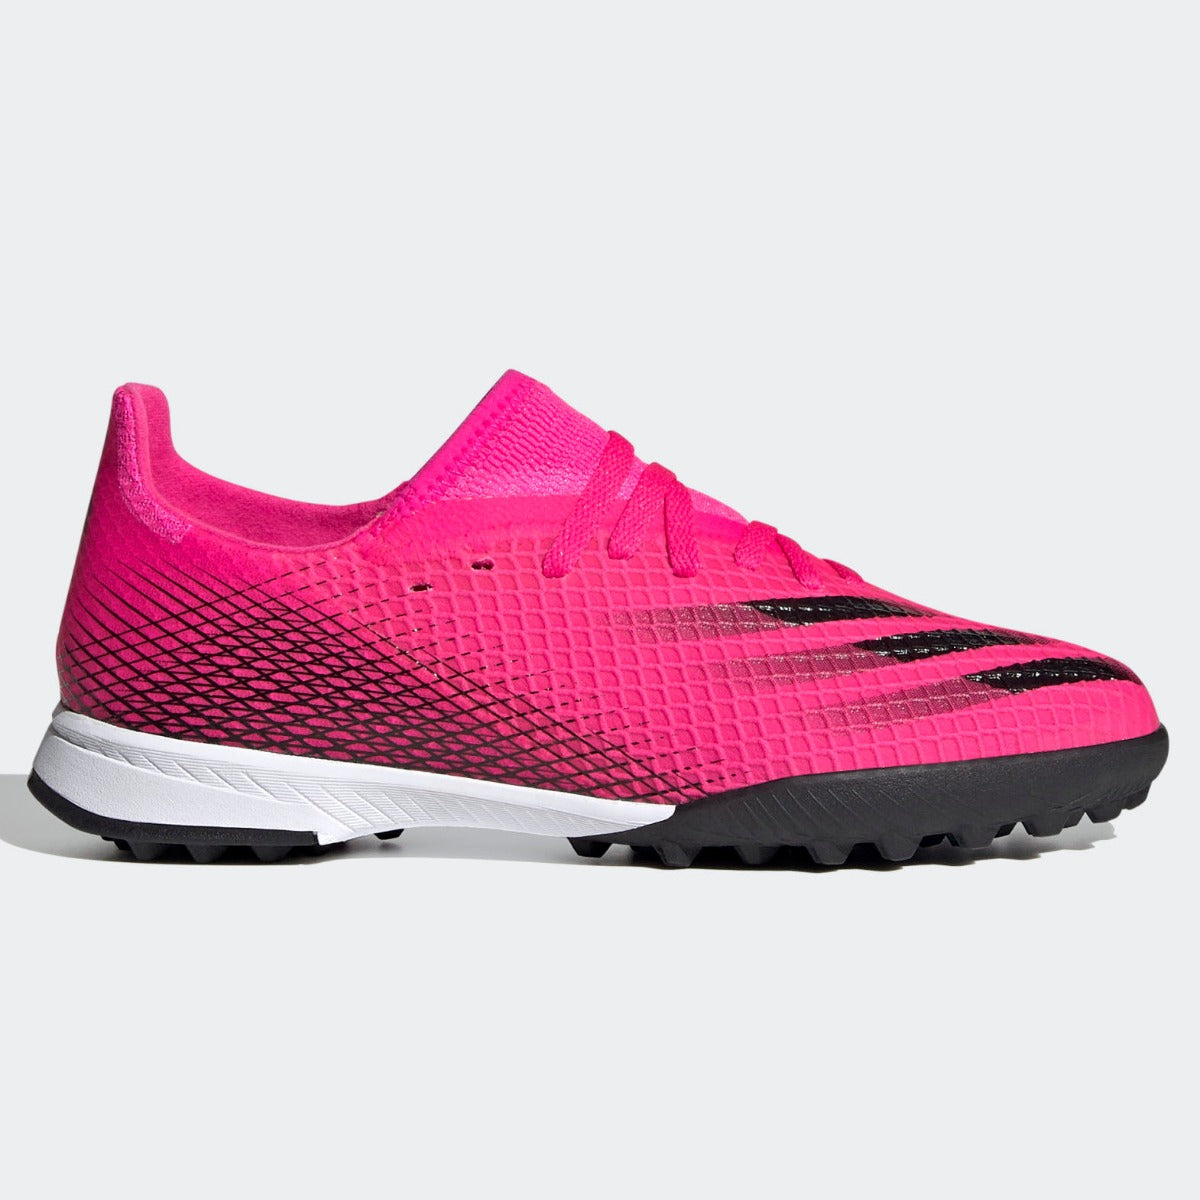 Adidas X Ghosted .3 JR TF - Pink-Black  (Side 1)